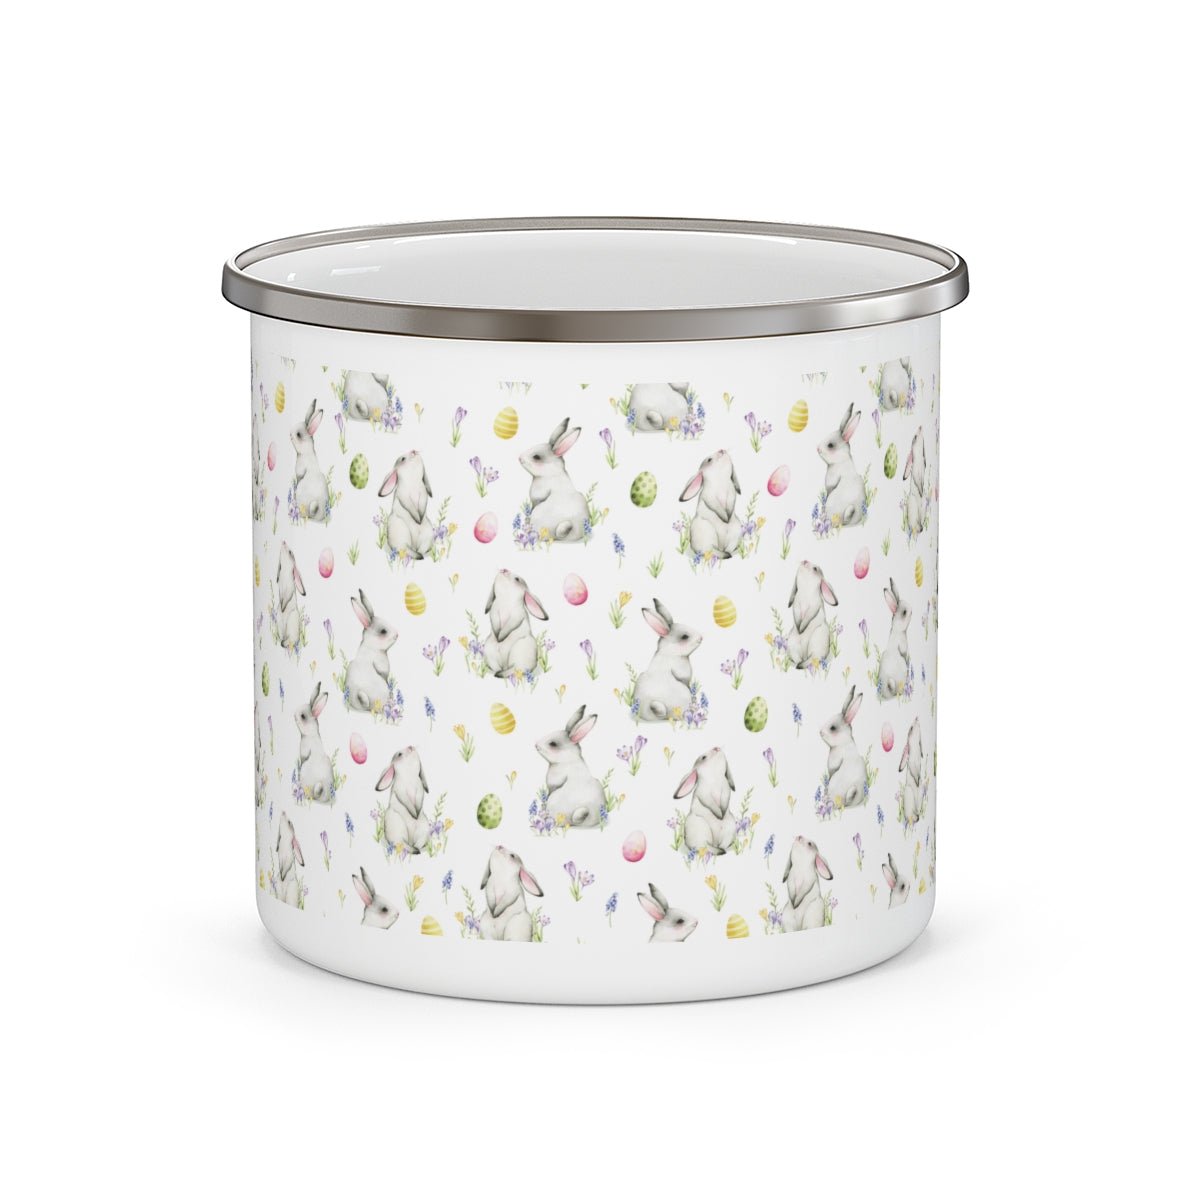 Cottontail Bunnies and Eggs Stainless Steel Camping Mug - Puffin Lime